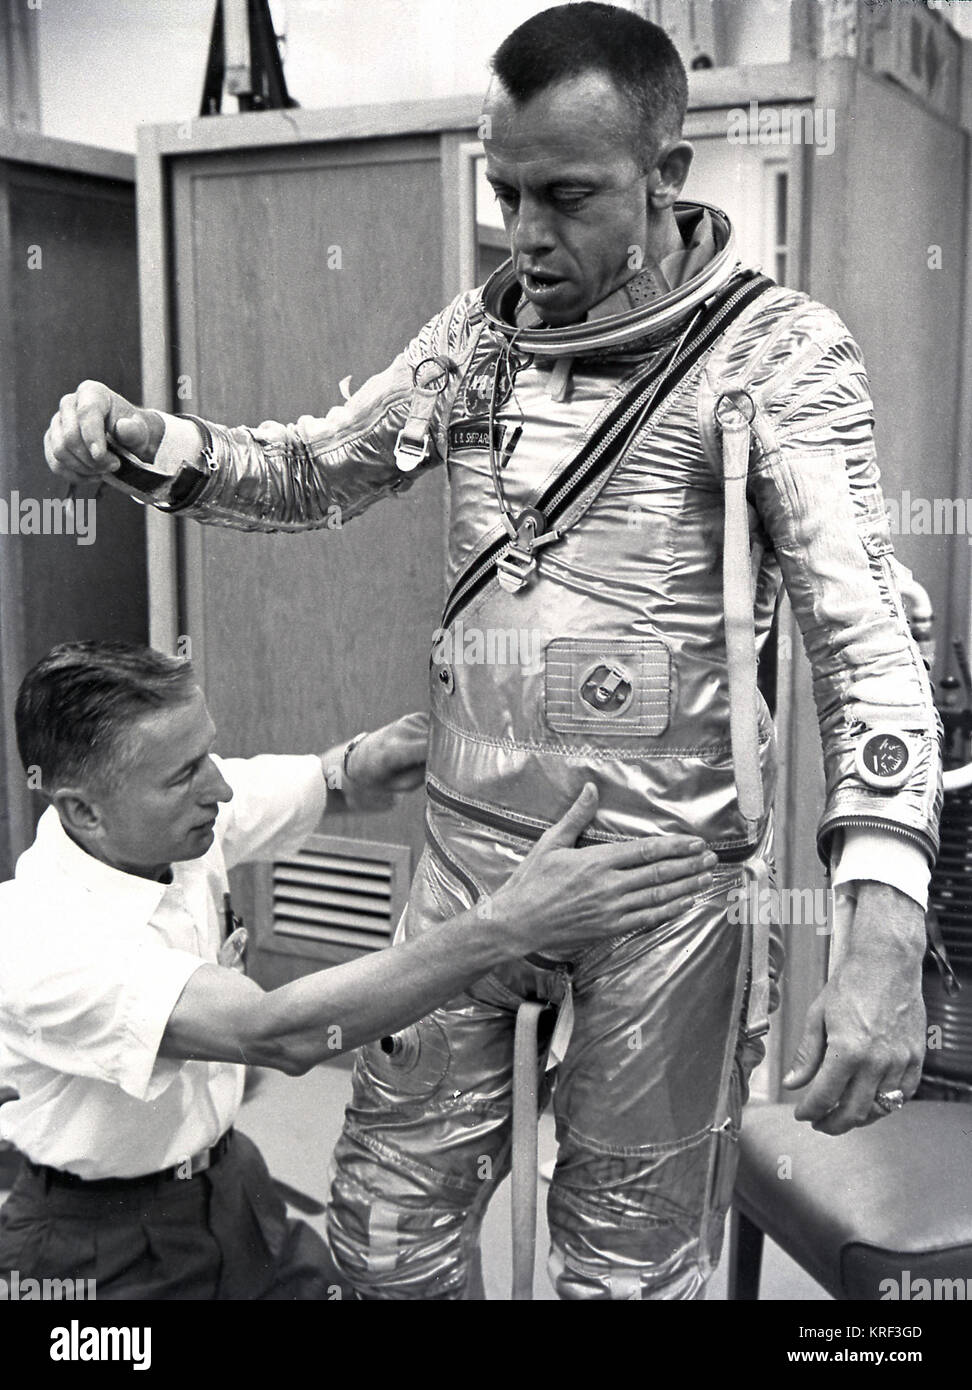 Astronaut Shepard,Alan fitted with Space suit MR-3 ( Mercury-Redstone) Freedom 7. REF: M61-1044-35 Shepard in Space Suit MSFC-6417073 Stock Photo